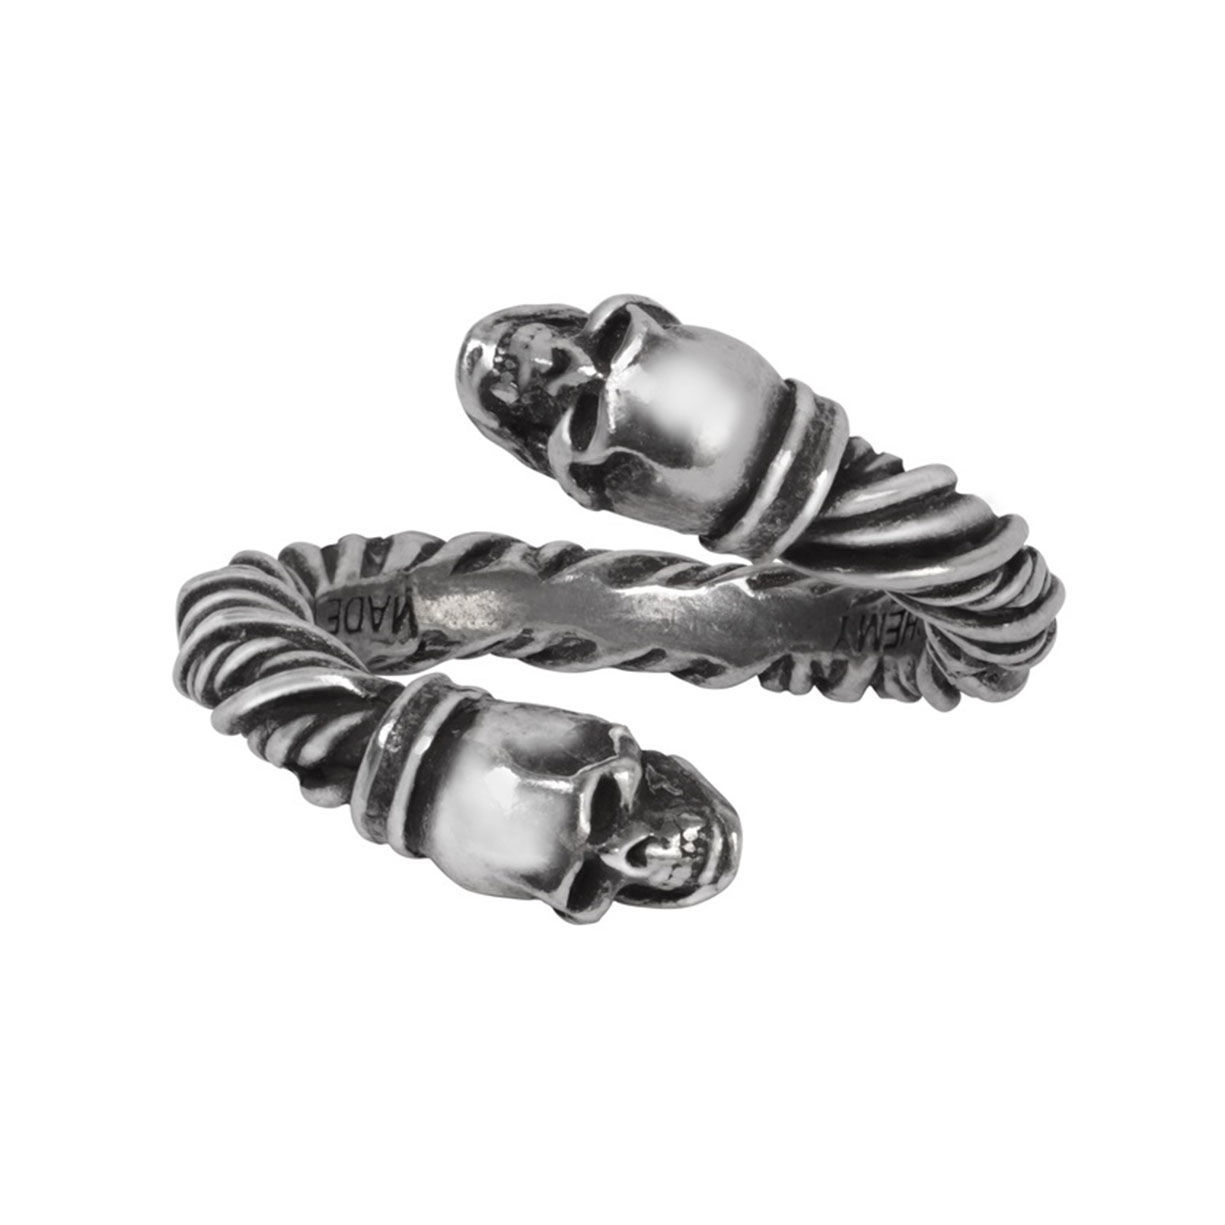 polished pewter Viking torque ring comes in 2 slightly adjustable sizes, from Alchemy Gothic, designed and made in England